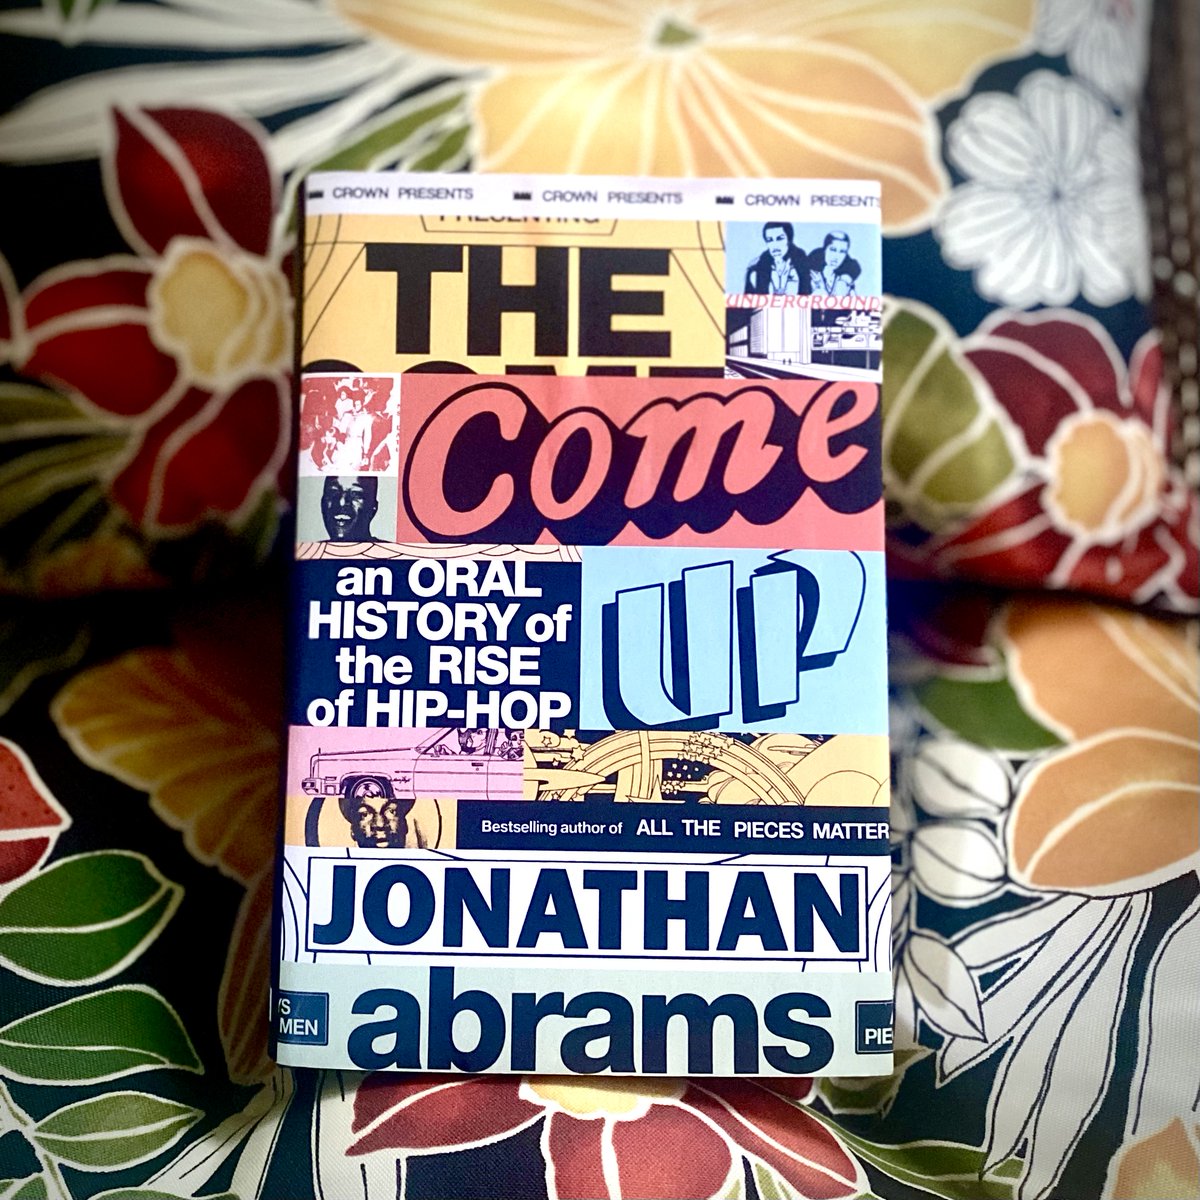 .@Jpdabrams' THE COME UP is the essential oral history of hip-hop—from its start at a party in the Bronx to its rise as the most popular genre in America. Learn about the music from the people who witnessed & forged its history in THE COME UP—out today. penguinrandomhouse.com/books/605156/t…